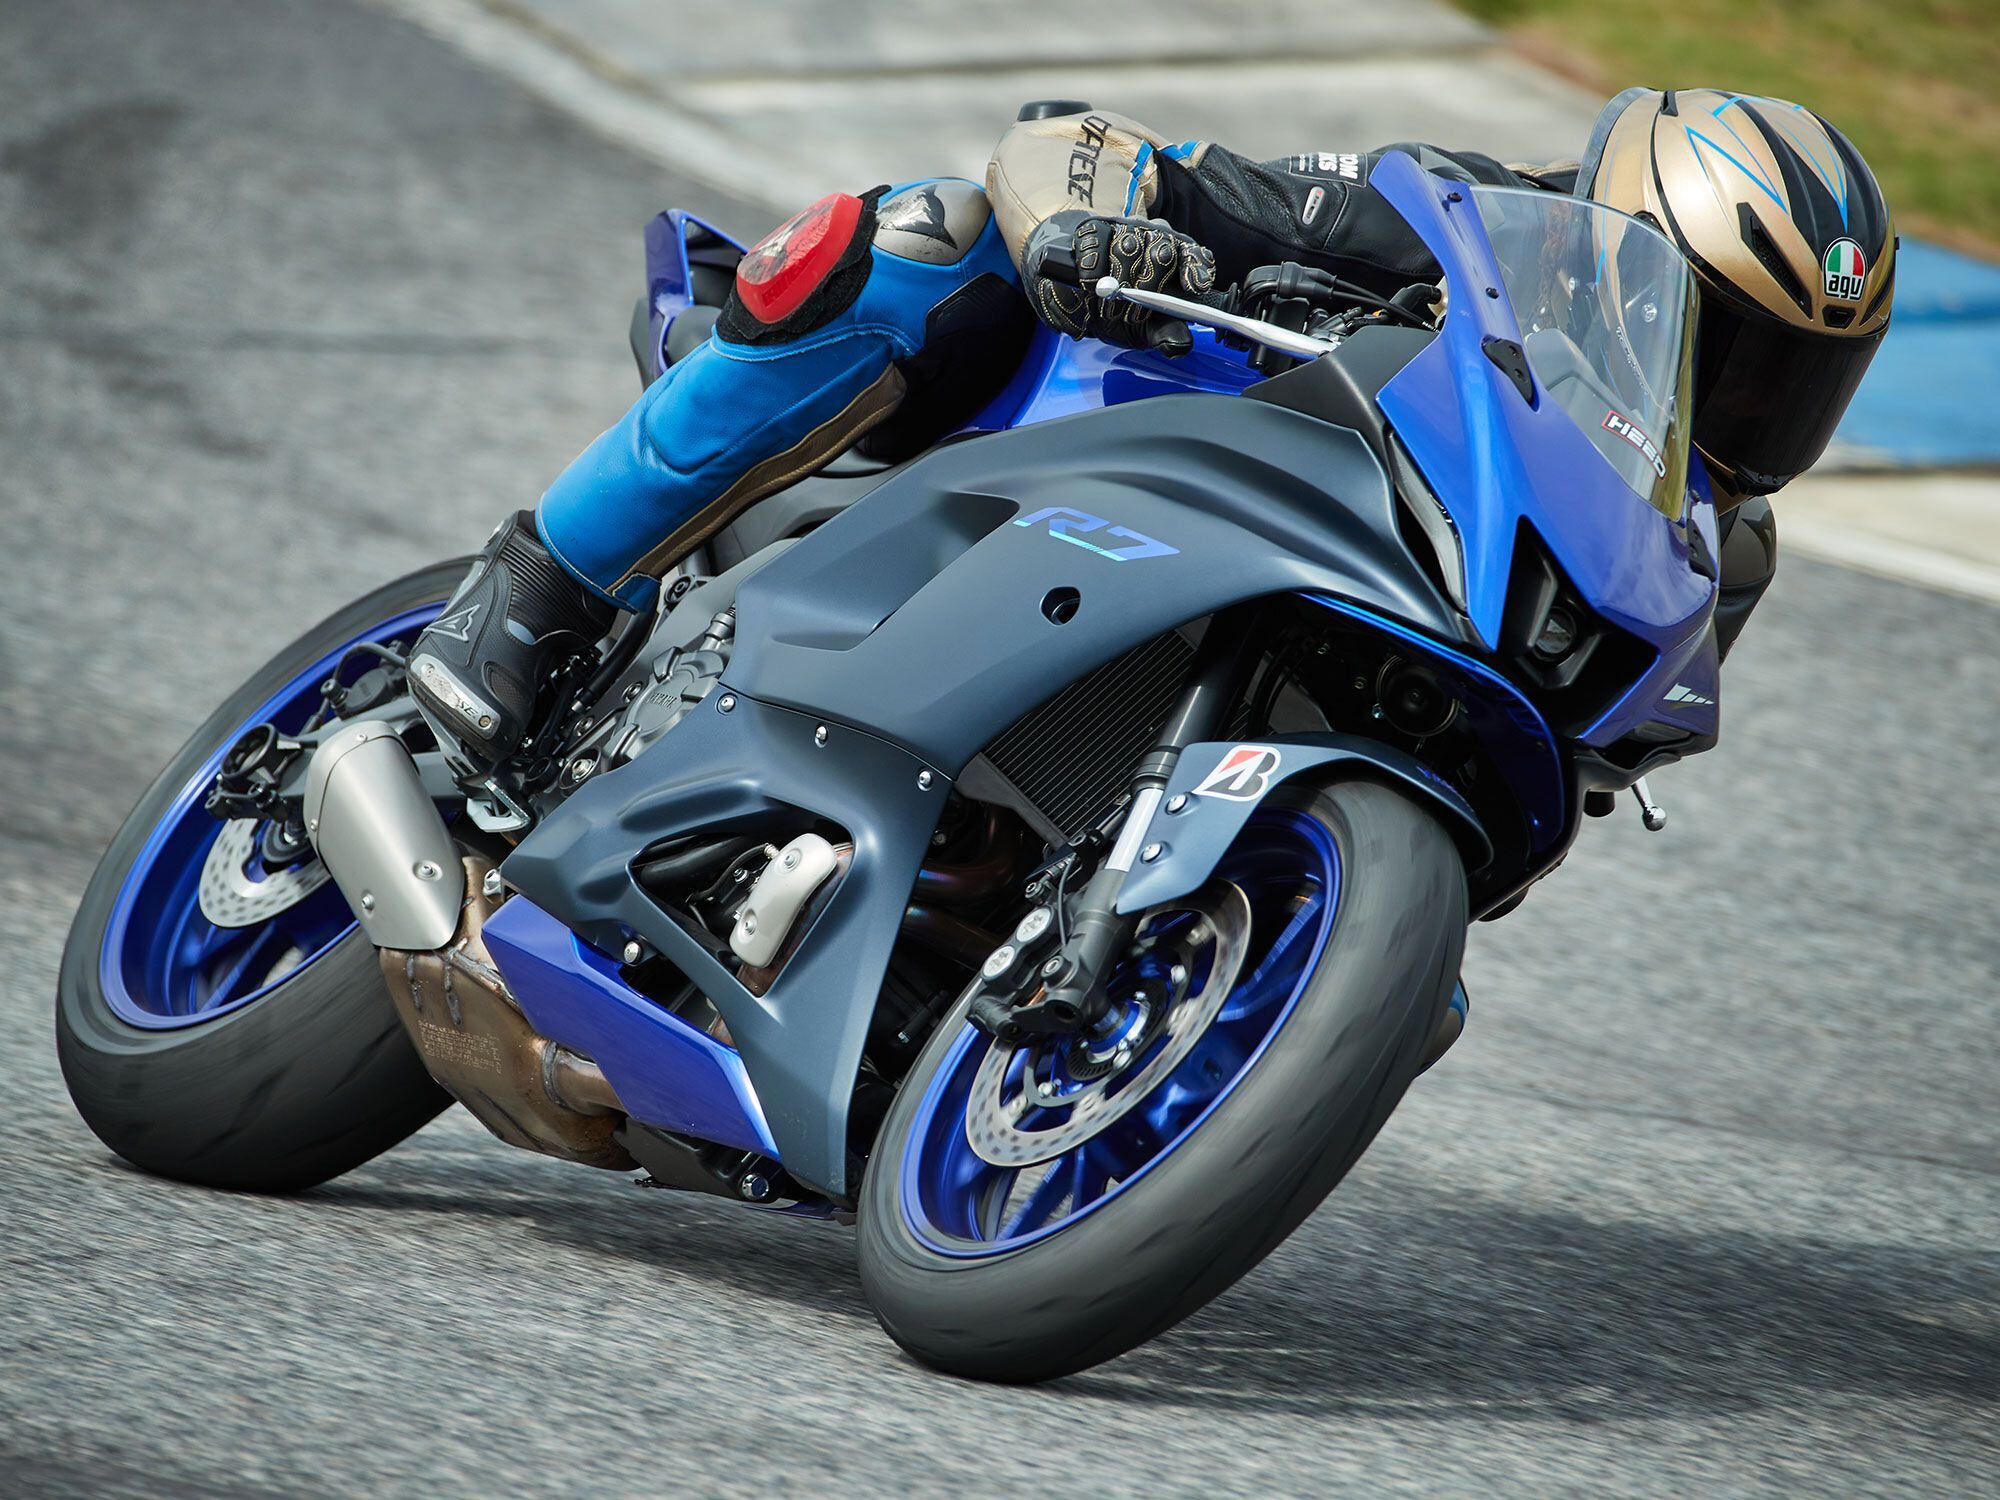 Despite only weighing five pounds less than the outgoing YZF-R6. The parallel-twin powered R7 feels much lighter in action.